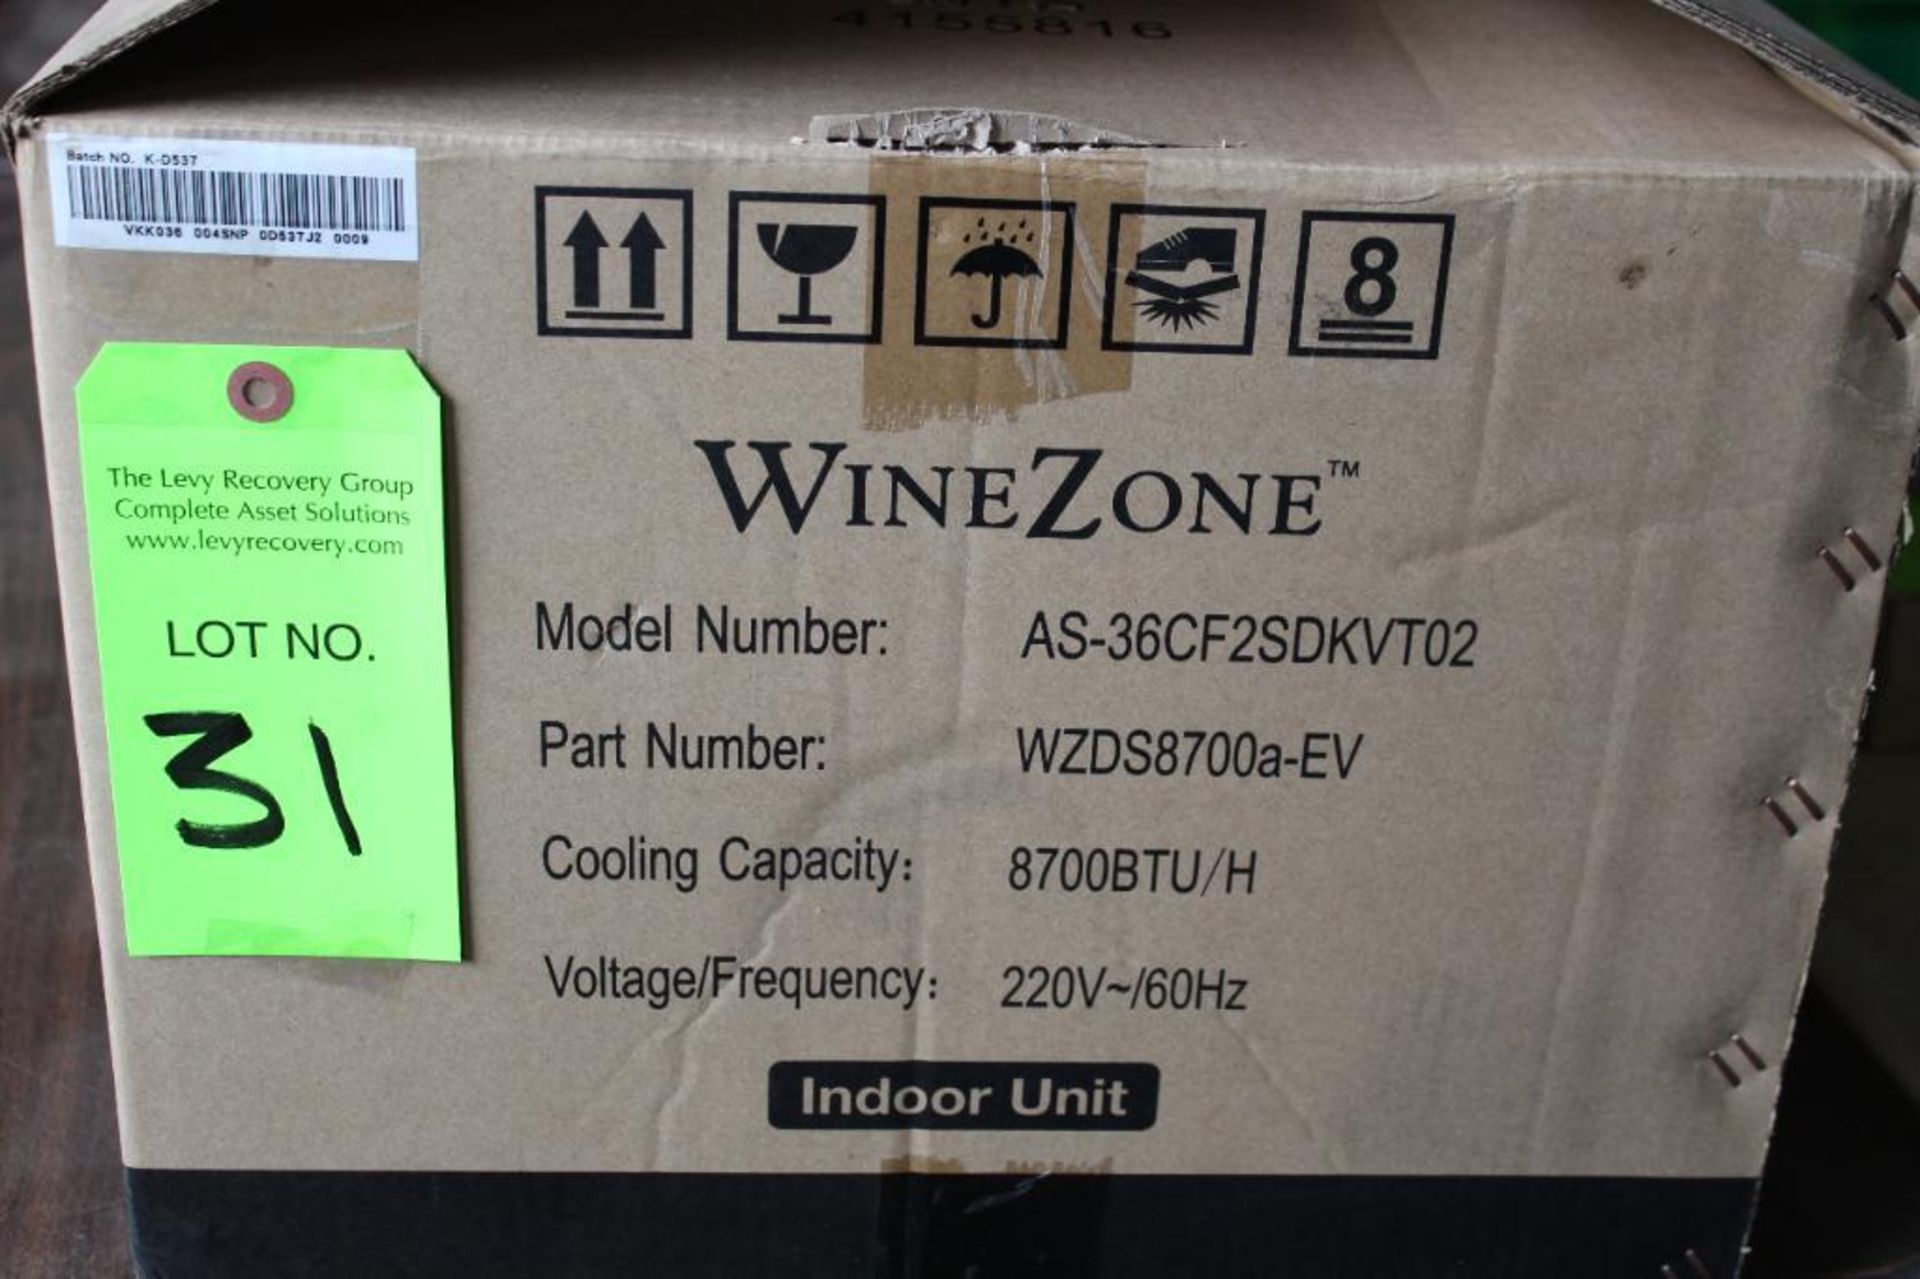 Wine Zone, Model AS-36CF2SDKVT02, Indoor Cooling Unit - Image 2 of 3